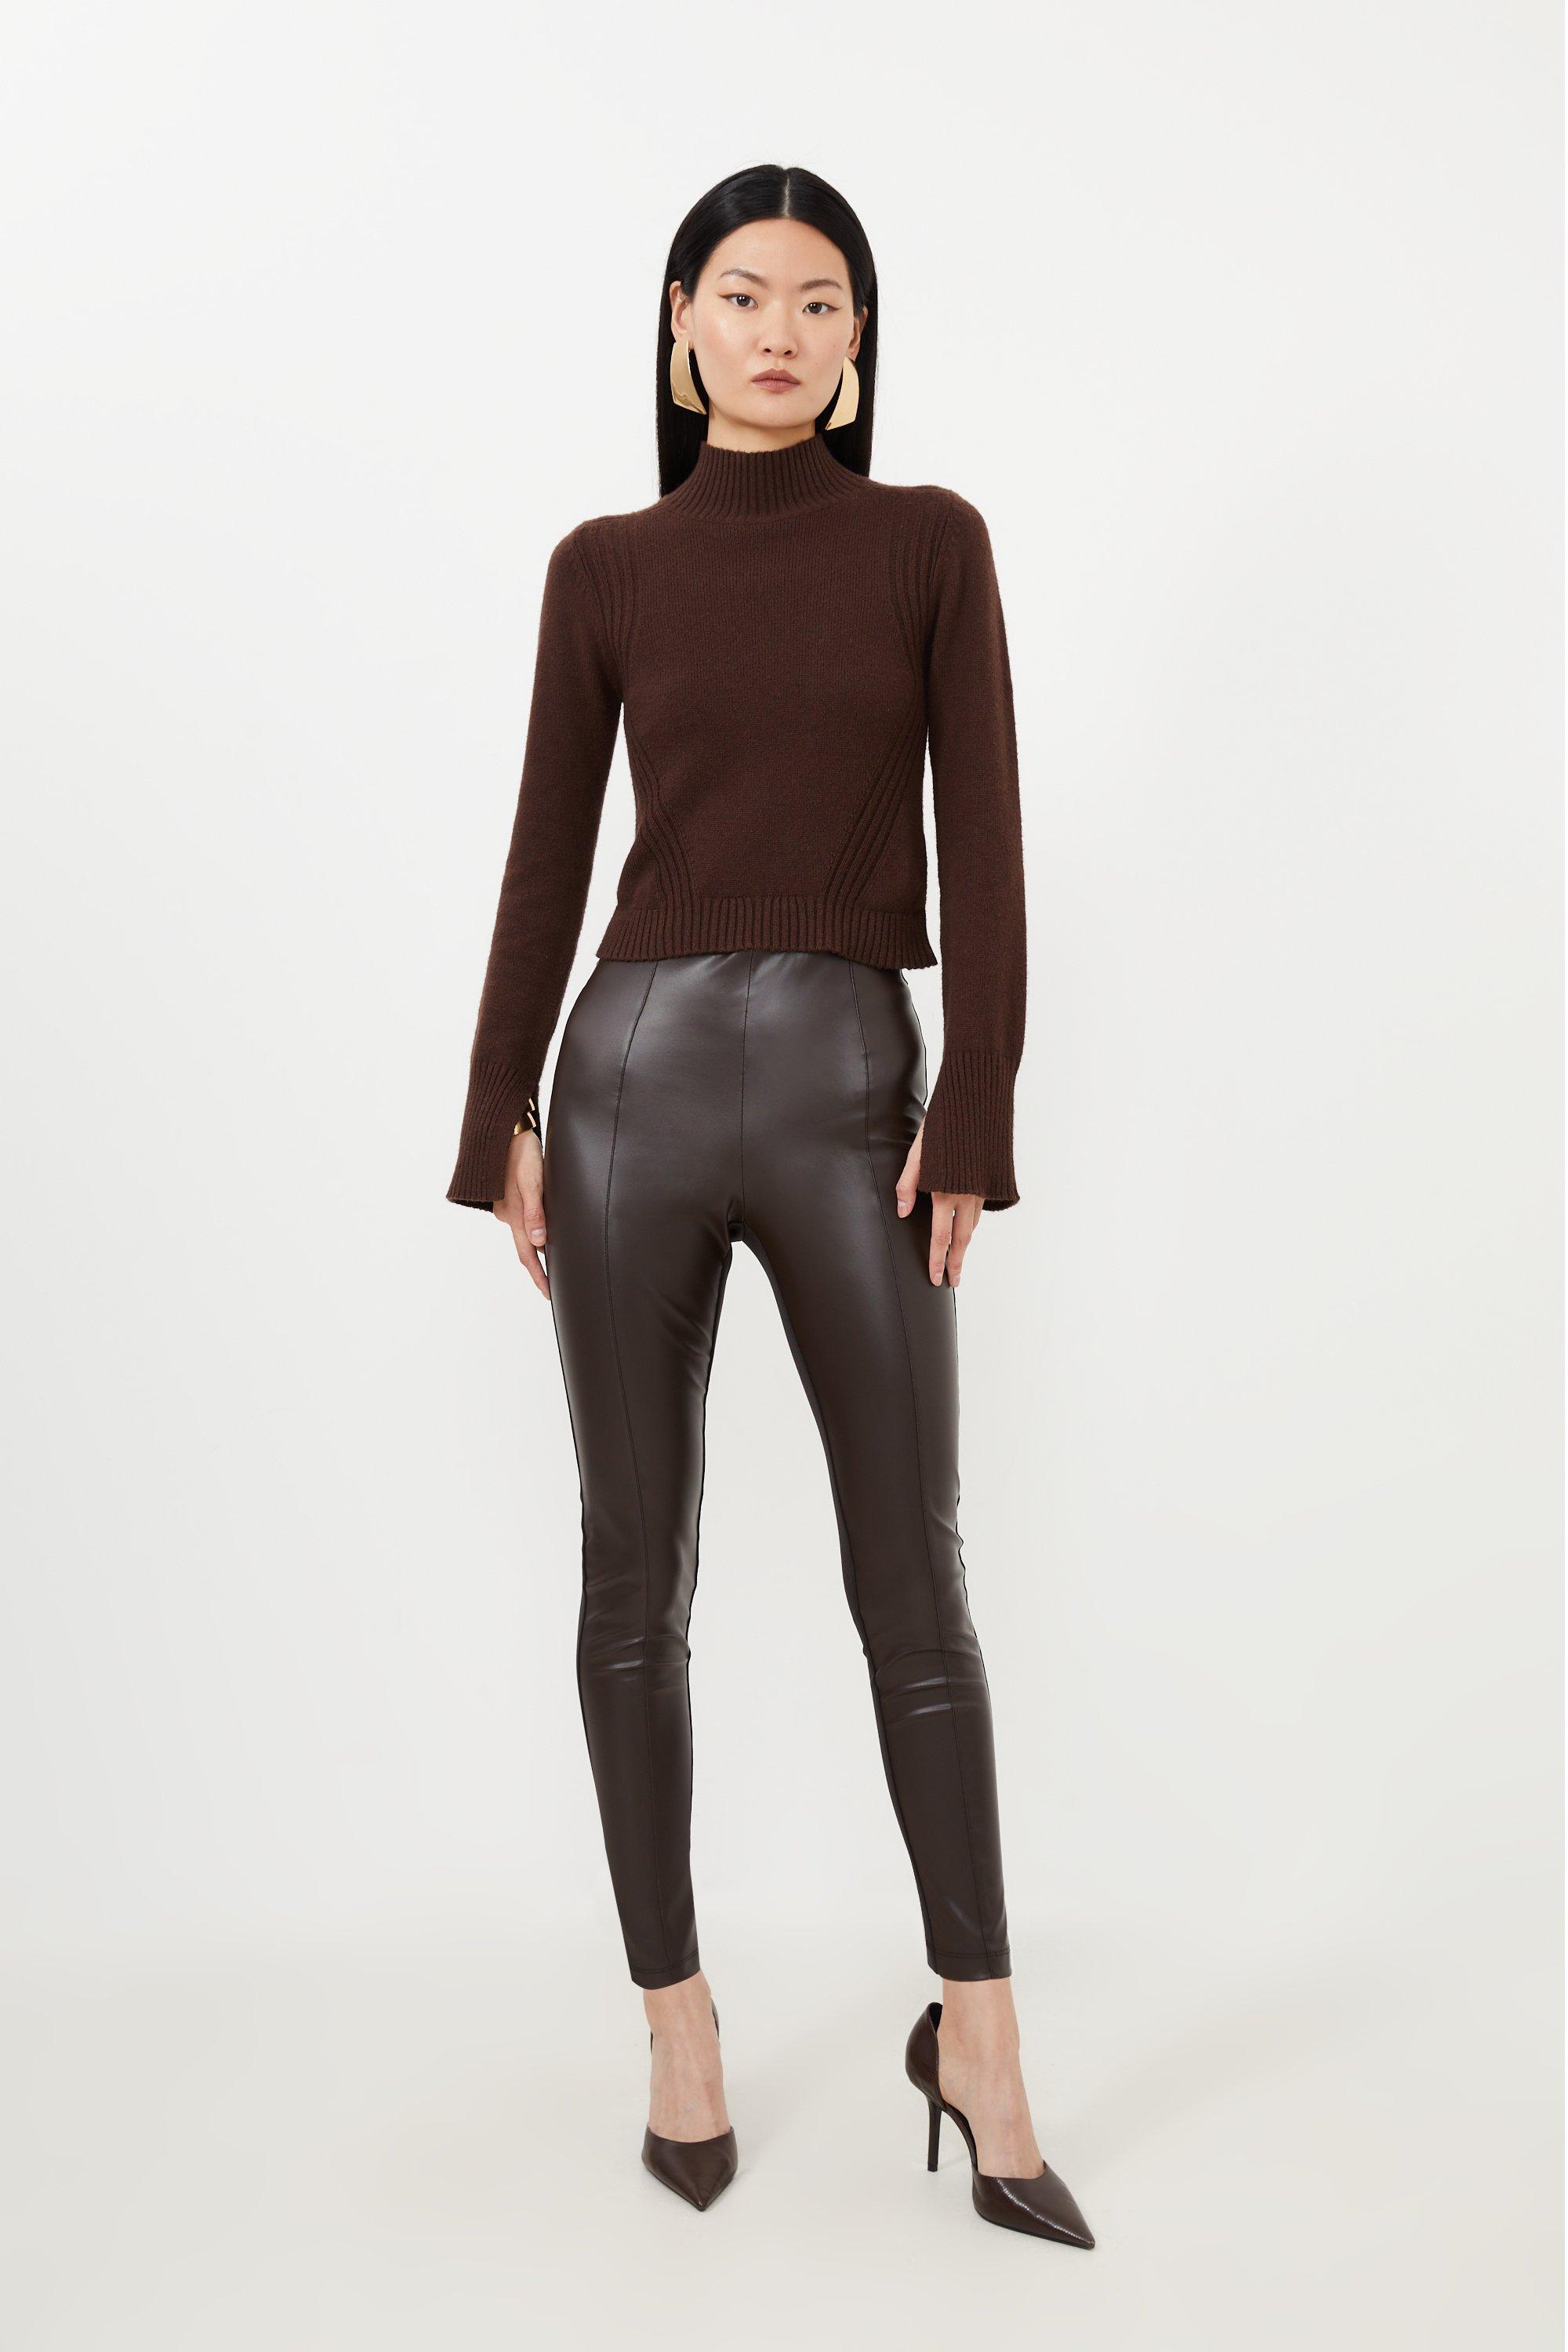 Metallic Faux Leather Leggings - Silver or Rose Gold 